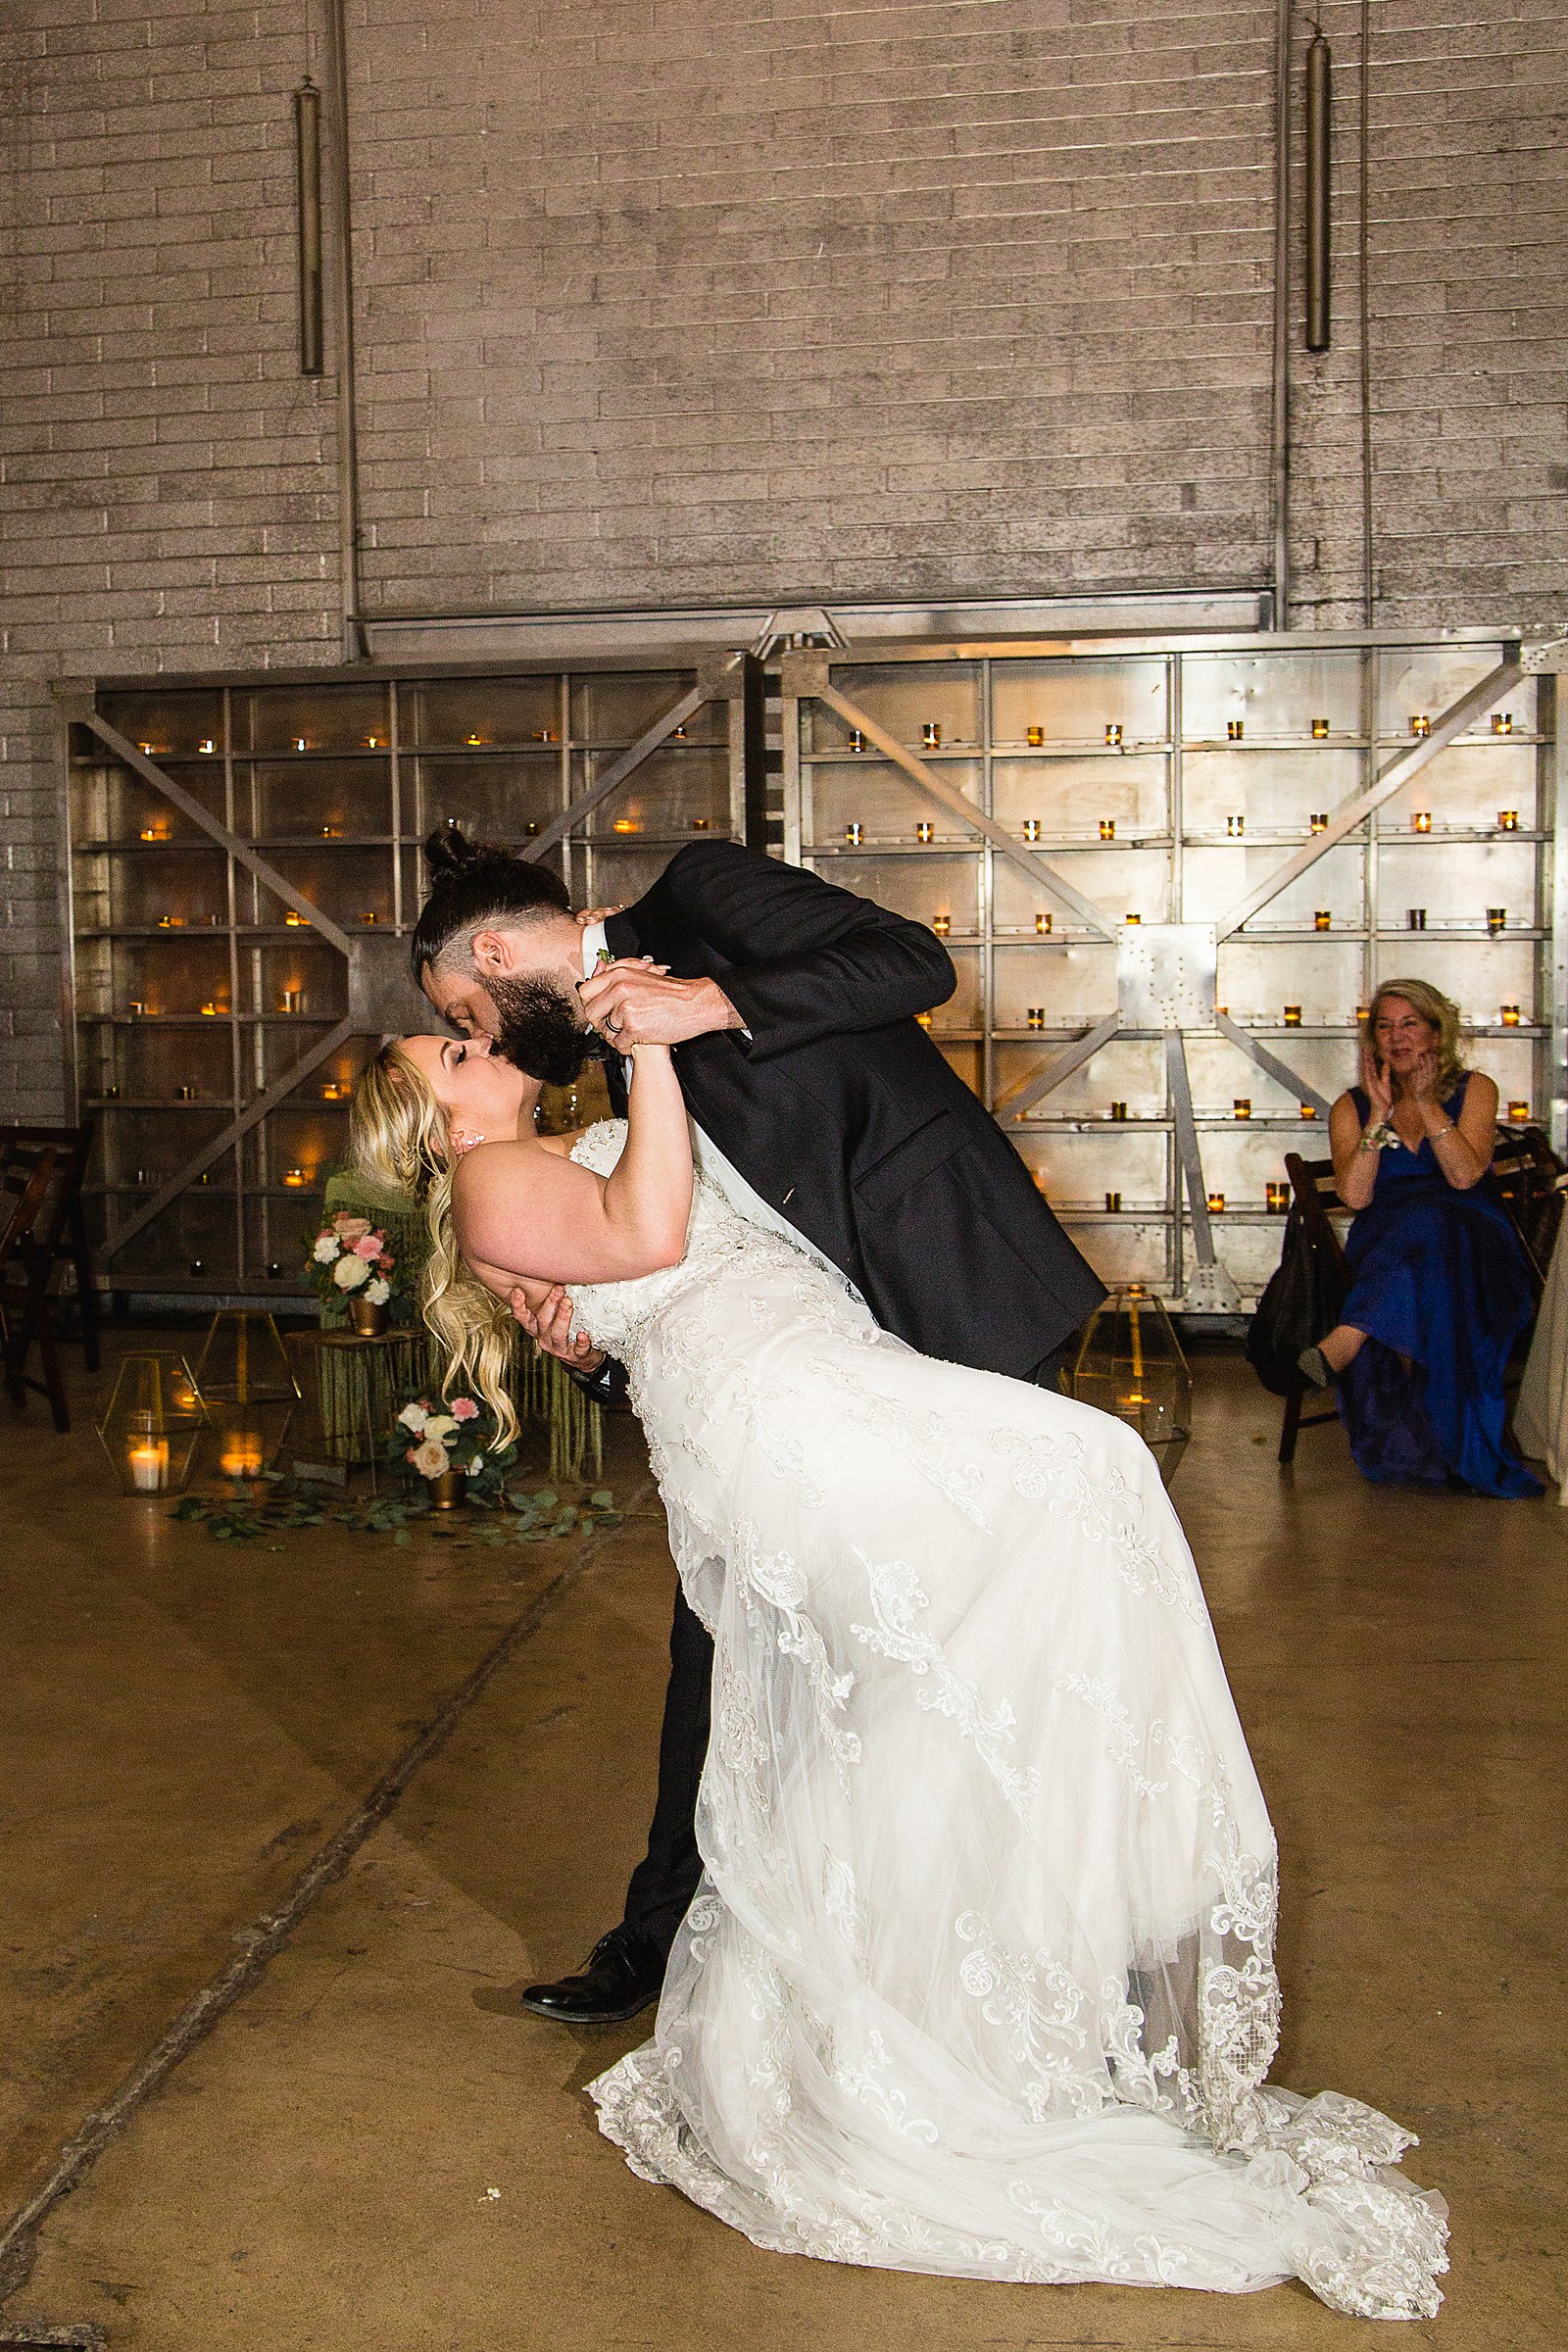 Bride and Groom sharing first dance at their The Ice House wedding reception by Arizona wedding photographer PMA Photography.